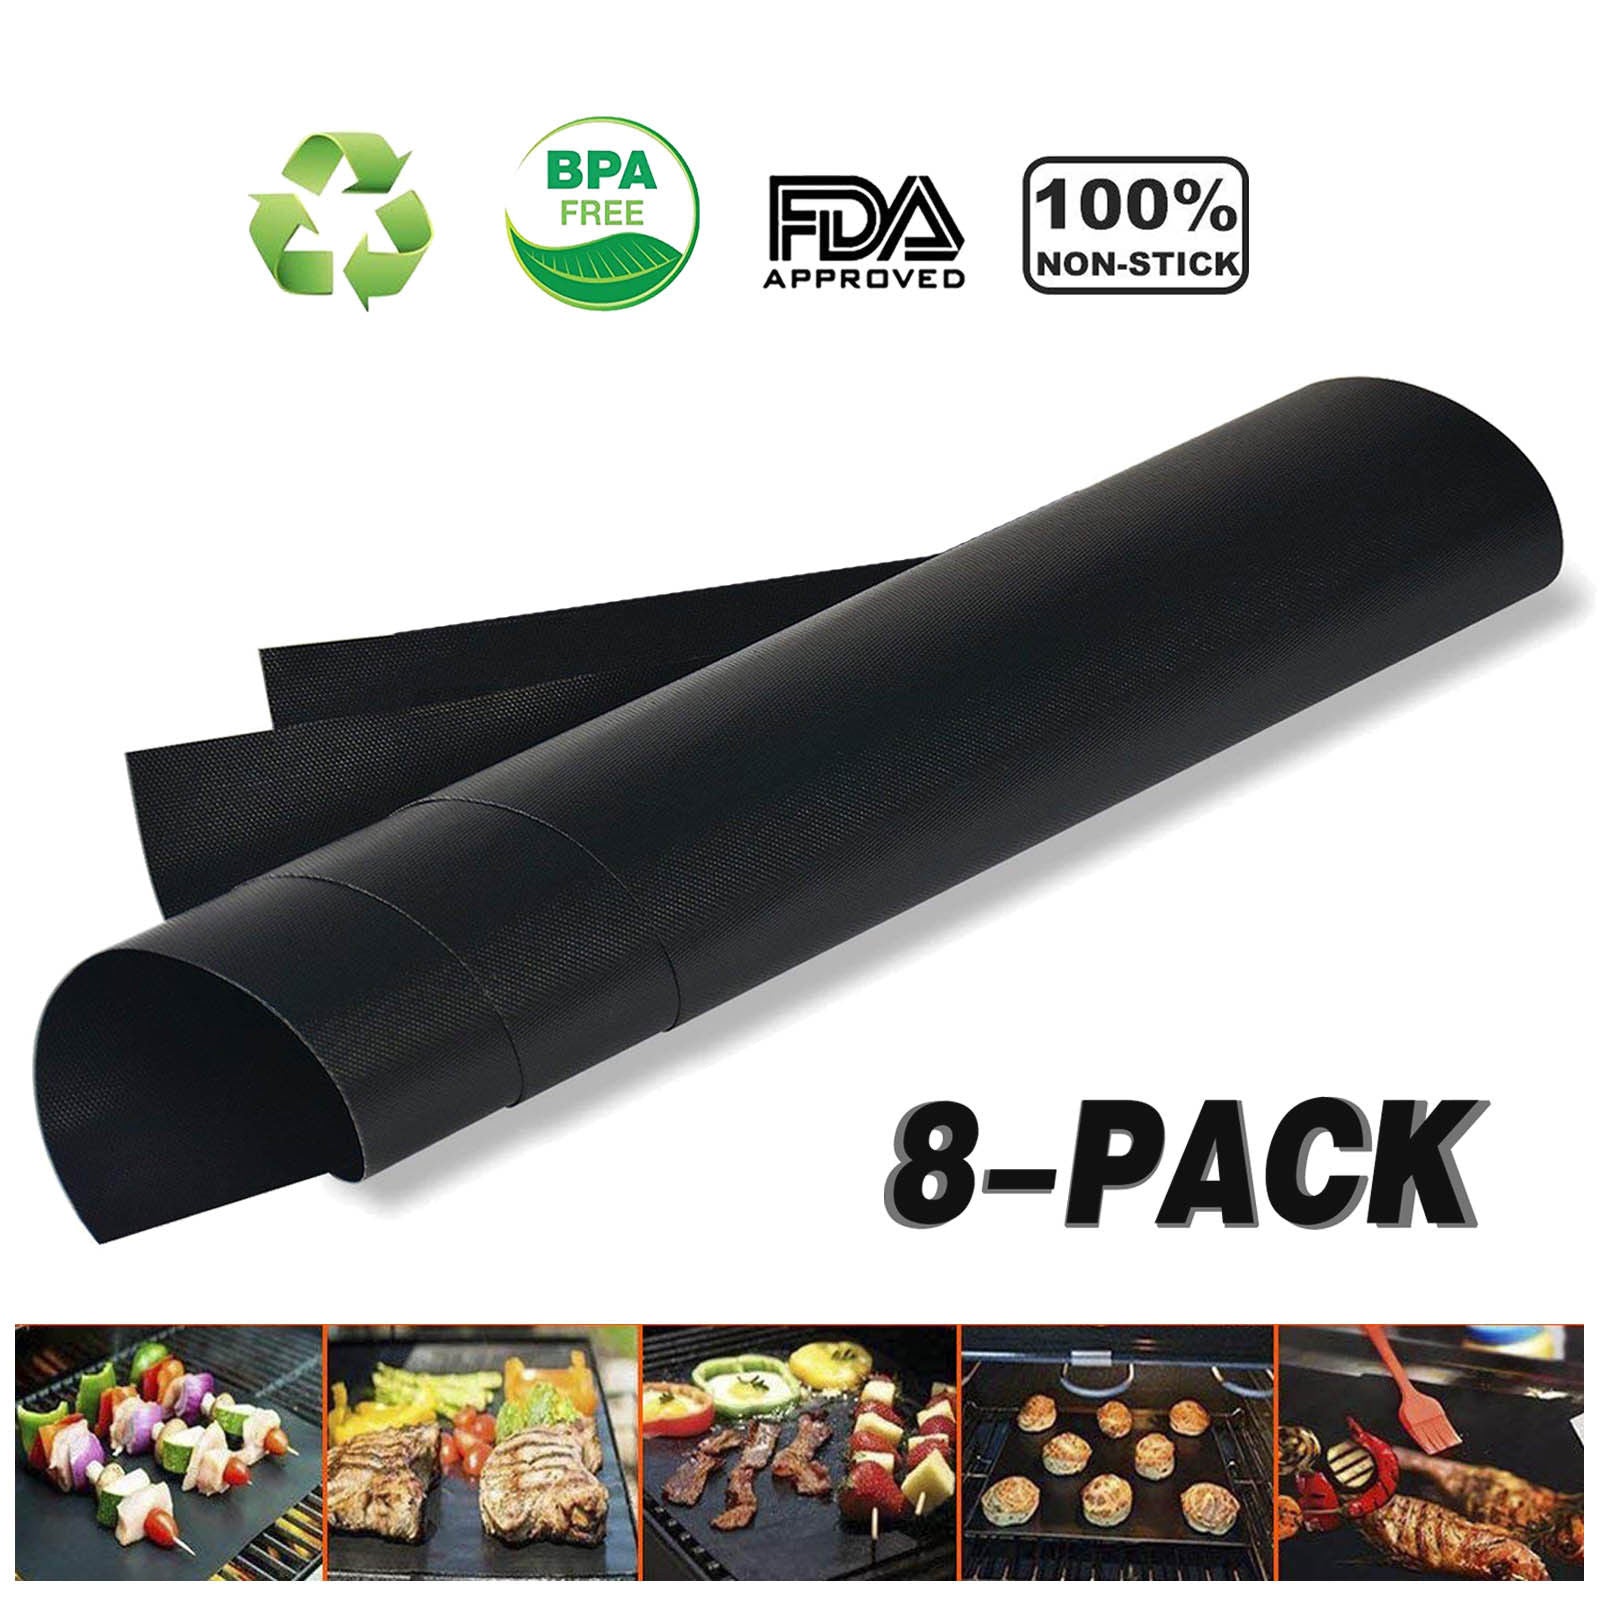 BBQ Grill Mat usable Sheet Resistant Non-Stick Barbecue Bake Meat US